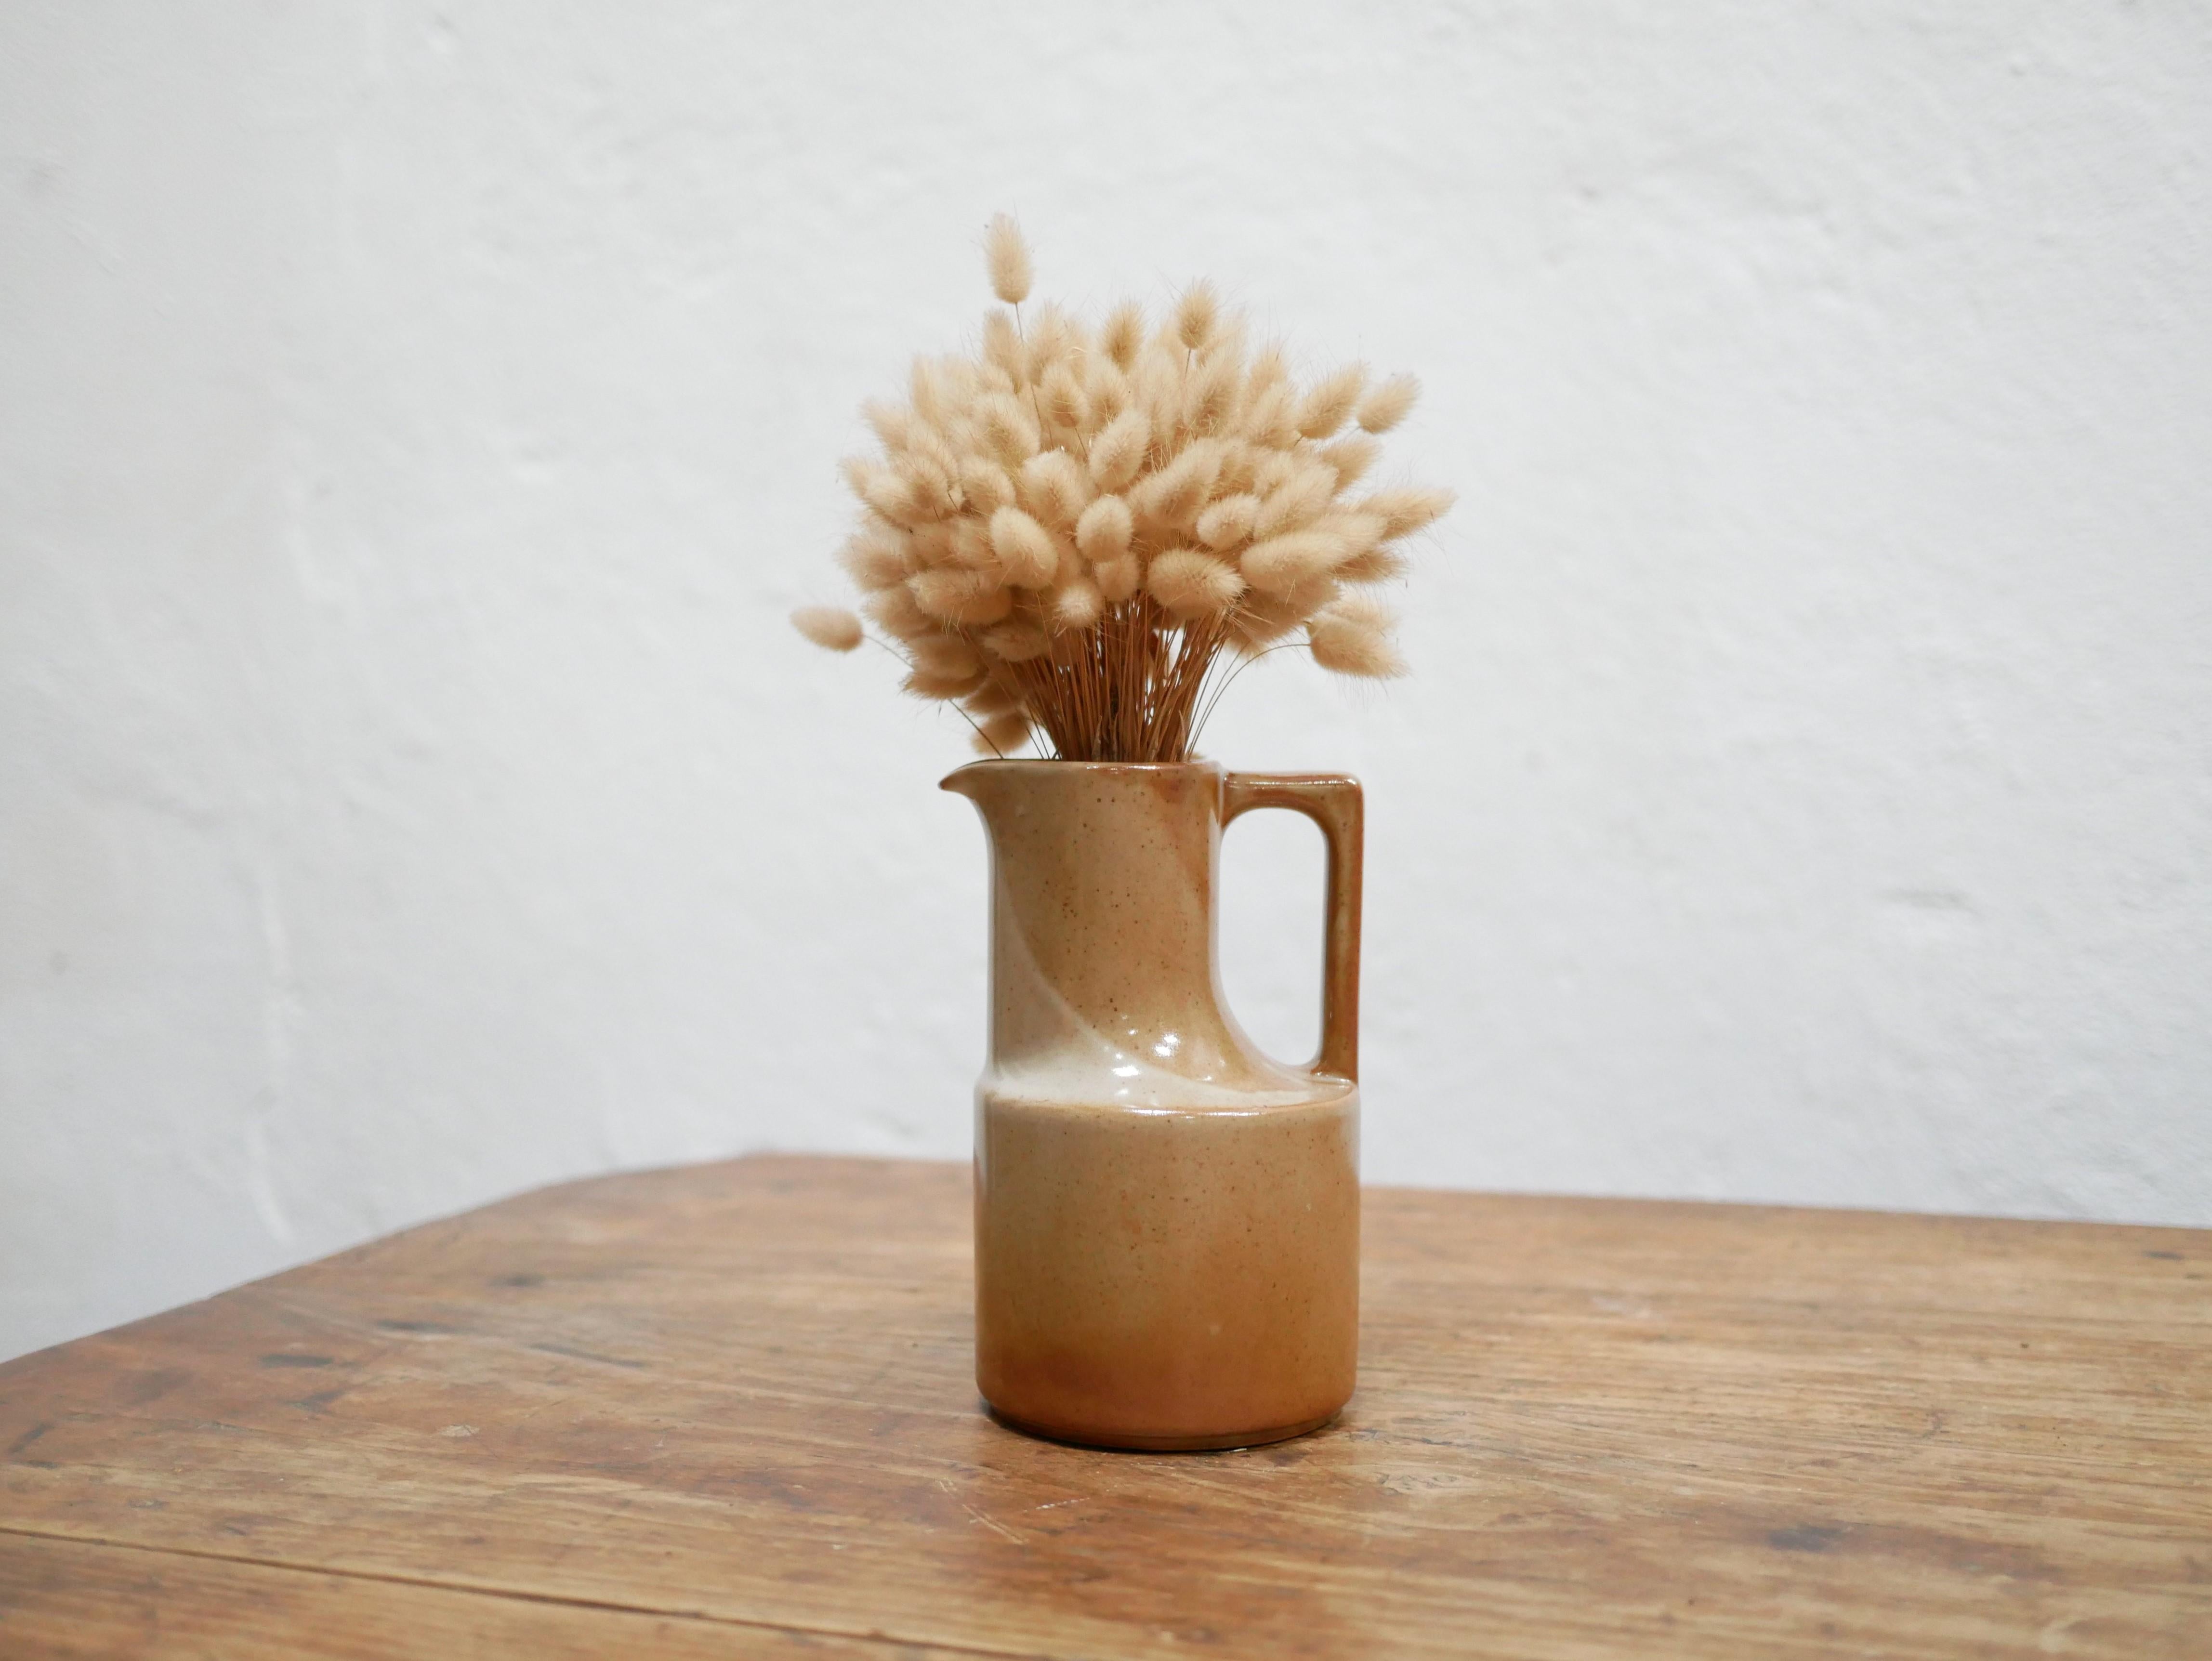 Pitcher in Brenne sandstone designed in France in the 1960s.

With its modern shape and mineral hue, this ceramic will be perfect in a natural, refined and delicate decoration.
We simply imagine it placed on a shelf or piece of furniture, adorned